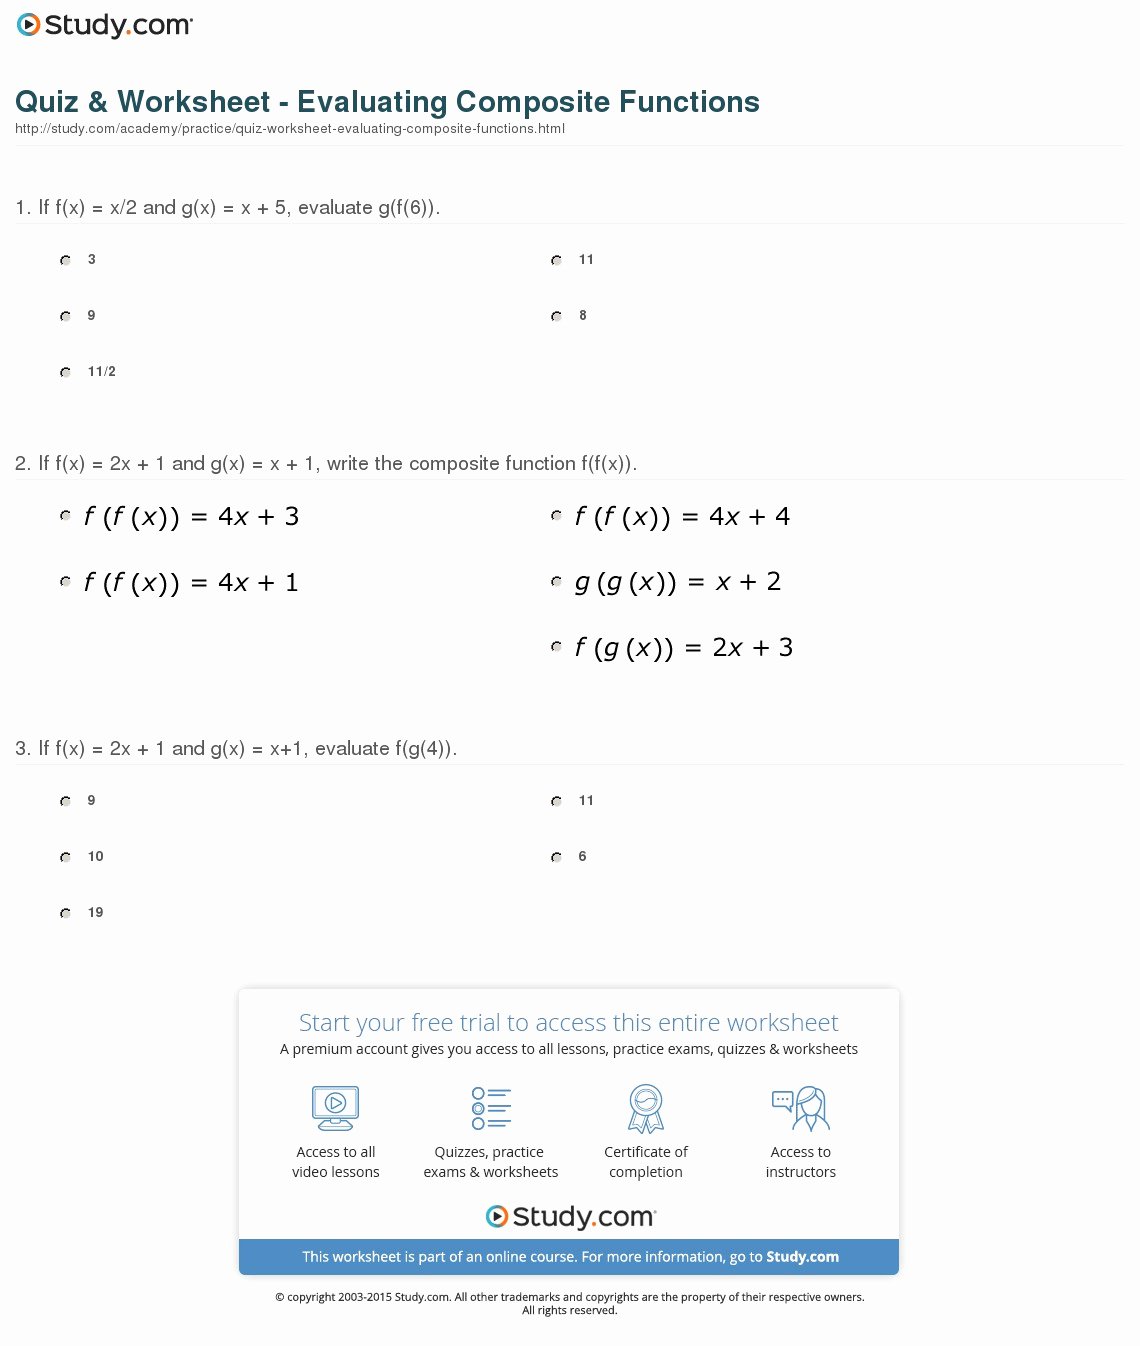 Composite Functions Worksheet Answers Awesome Quiz & Worksheet Evaluating Posite Functions